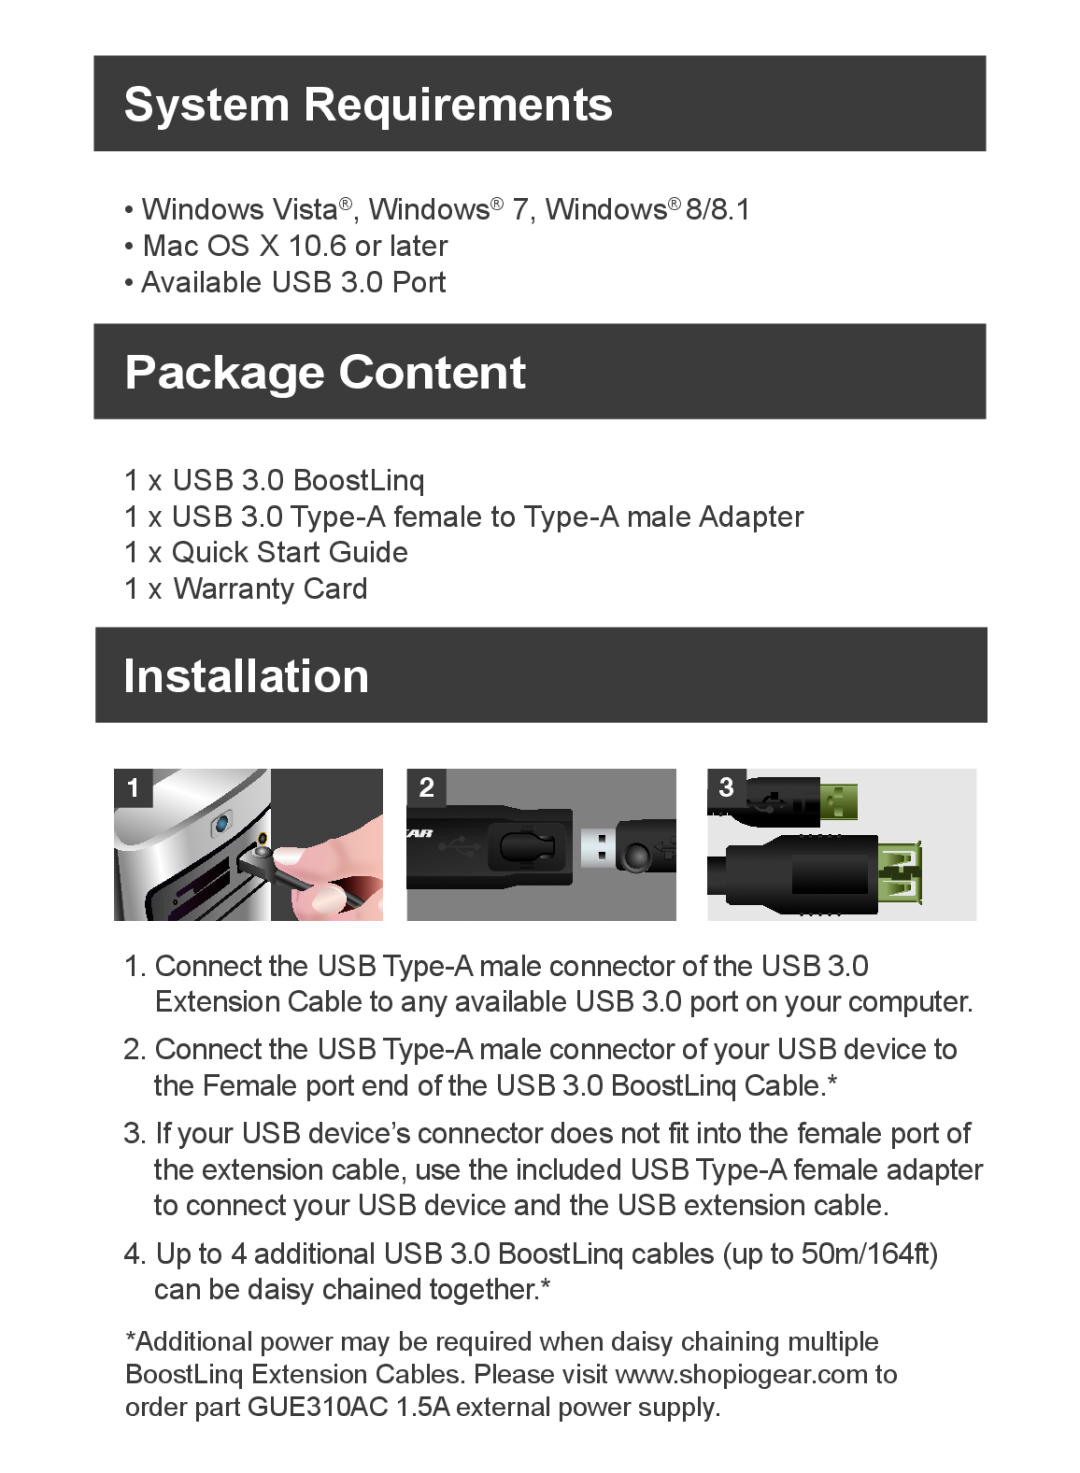 IOGear Q1280 quick start System Requirements, Package Content, Installation 